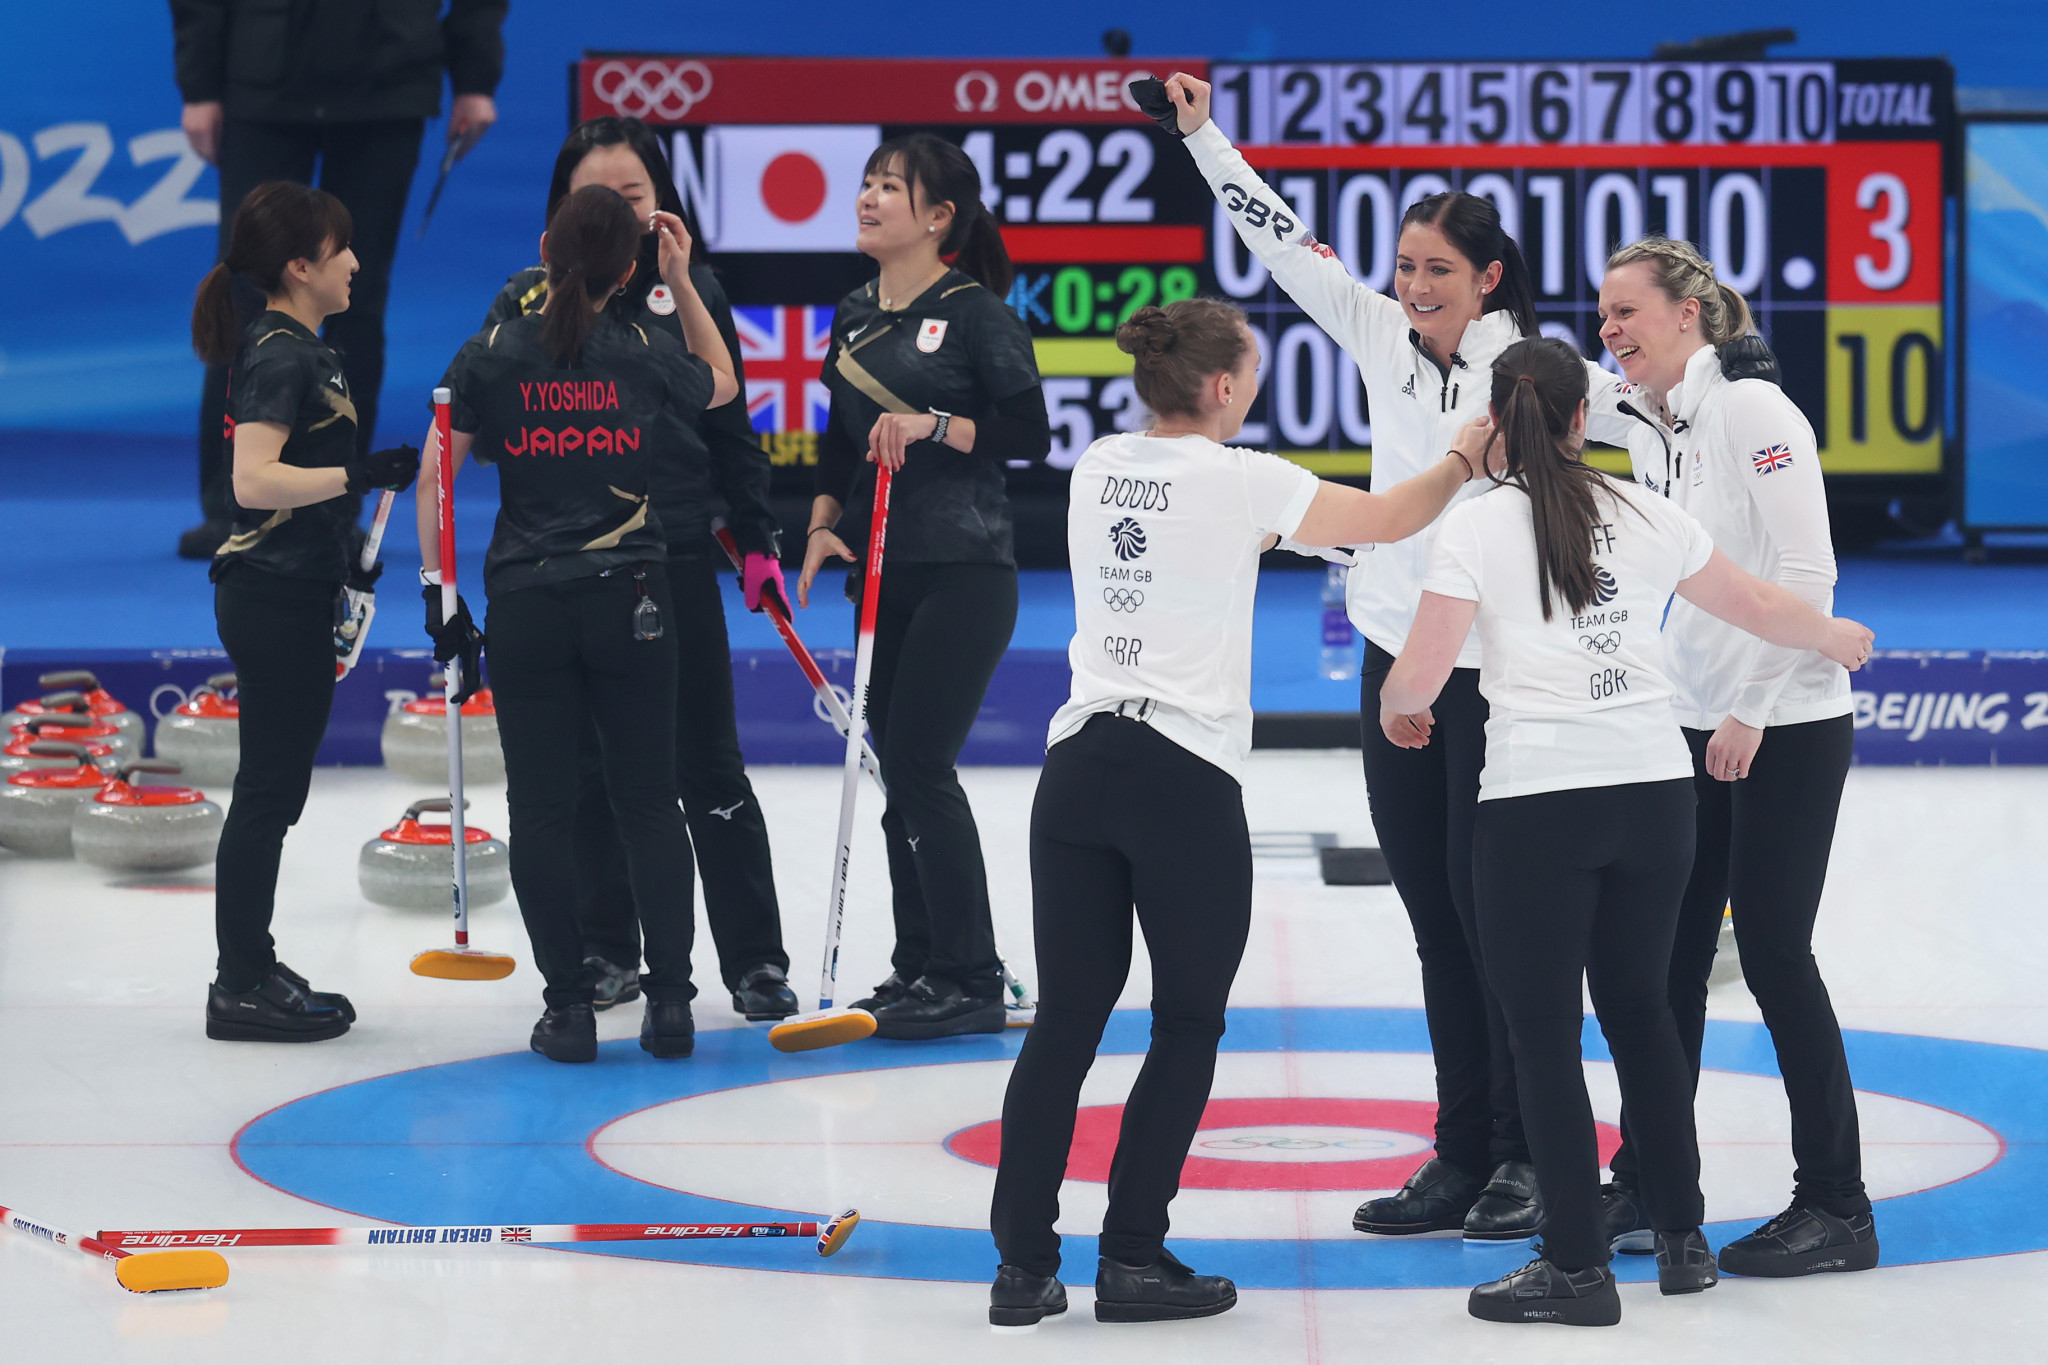 Britain overcame Japan 10-3 in the women's curling final at Beijing 2022 ©Getty Images